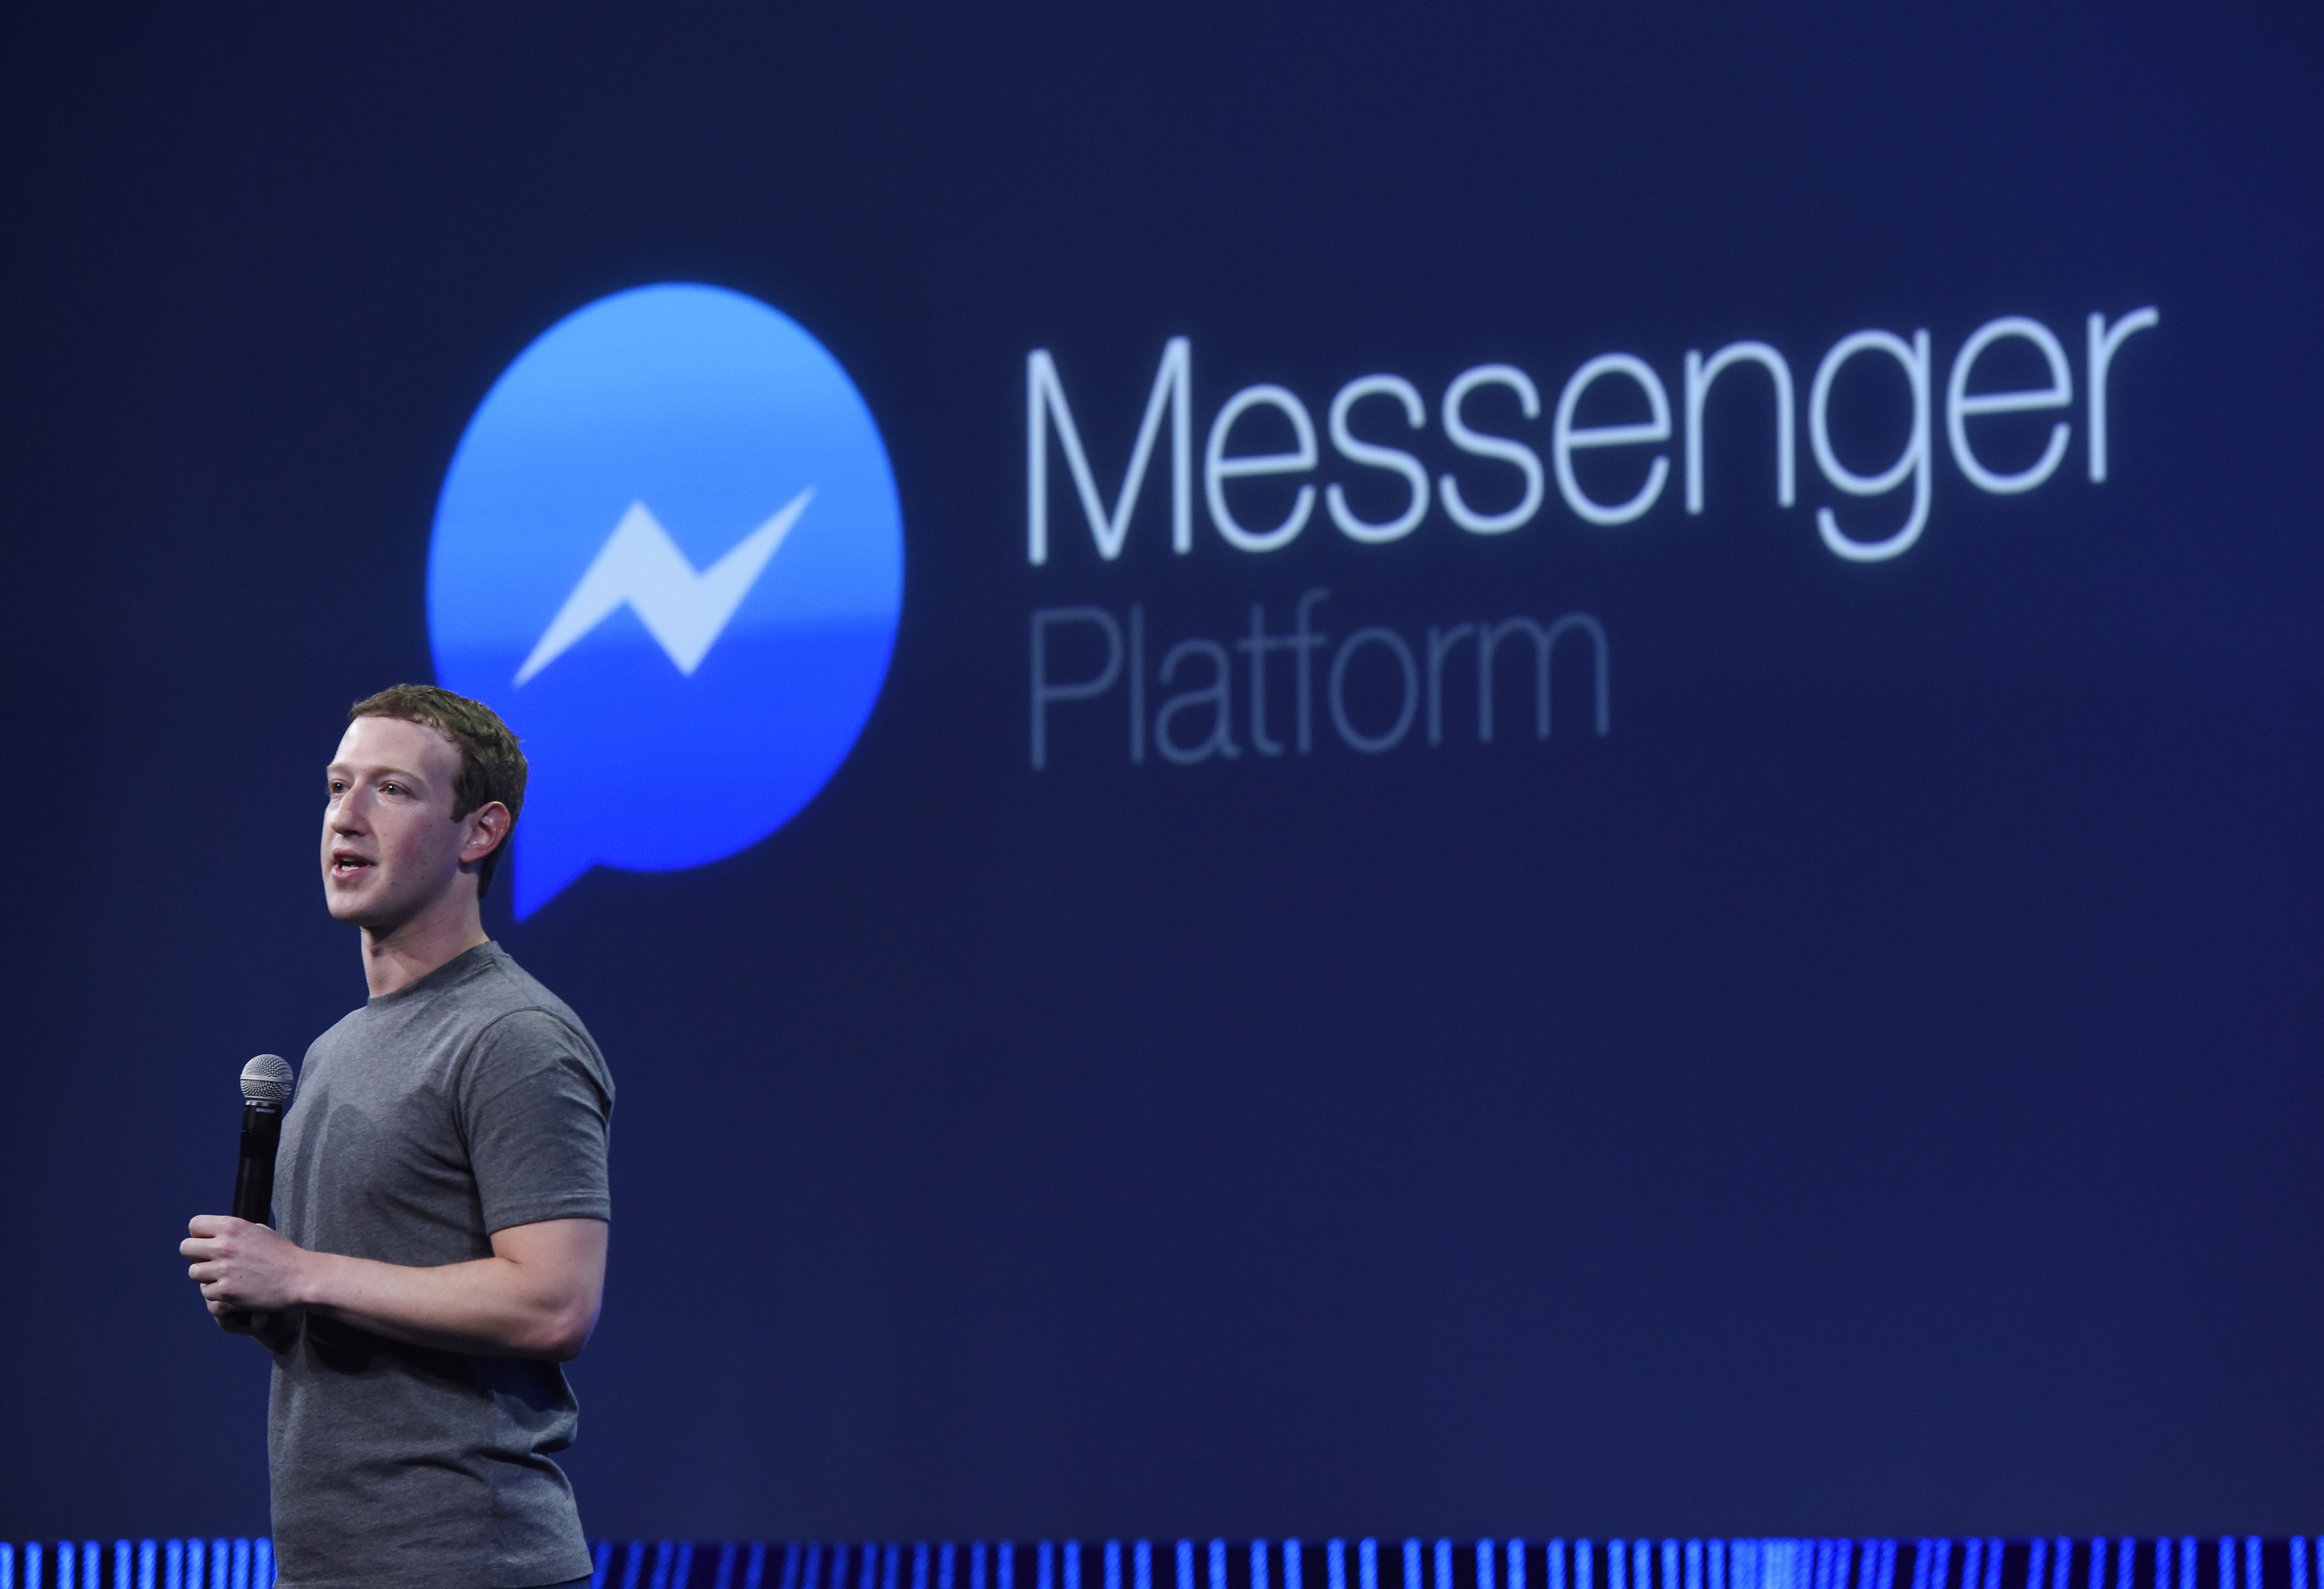 Mark Zuckerberg, CEO of Facebook Inc., speaks during the Facebook F8 Developers Conference in San Francisco, Calif., on March 25, 2015. (Bloomberg via Getty Images)